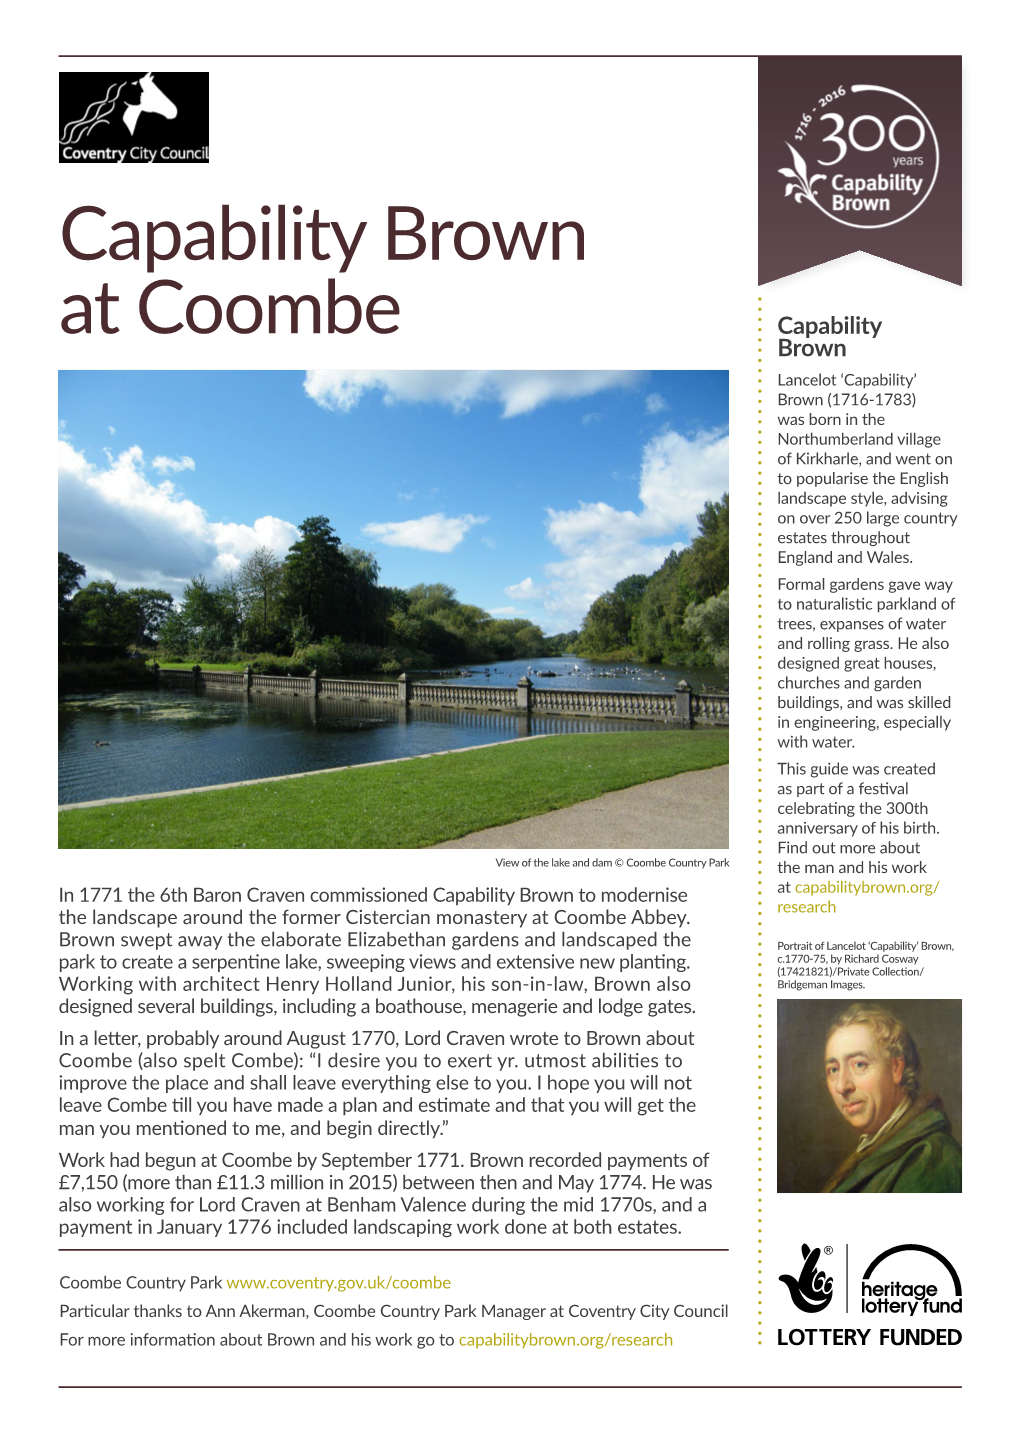 Capability Brown at Coombe